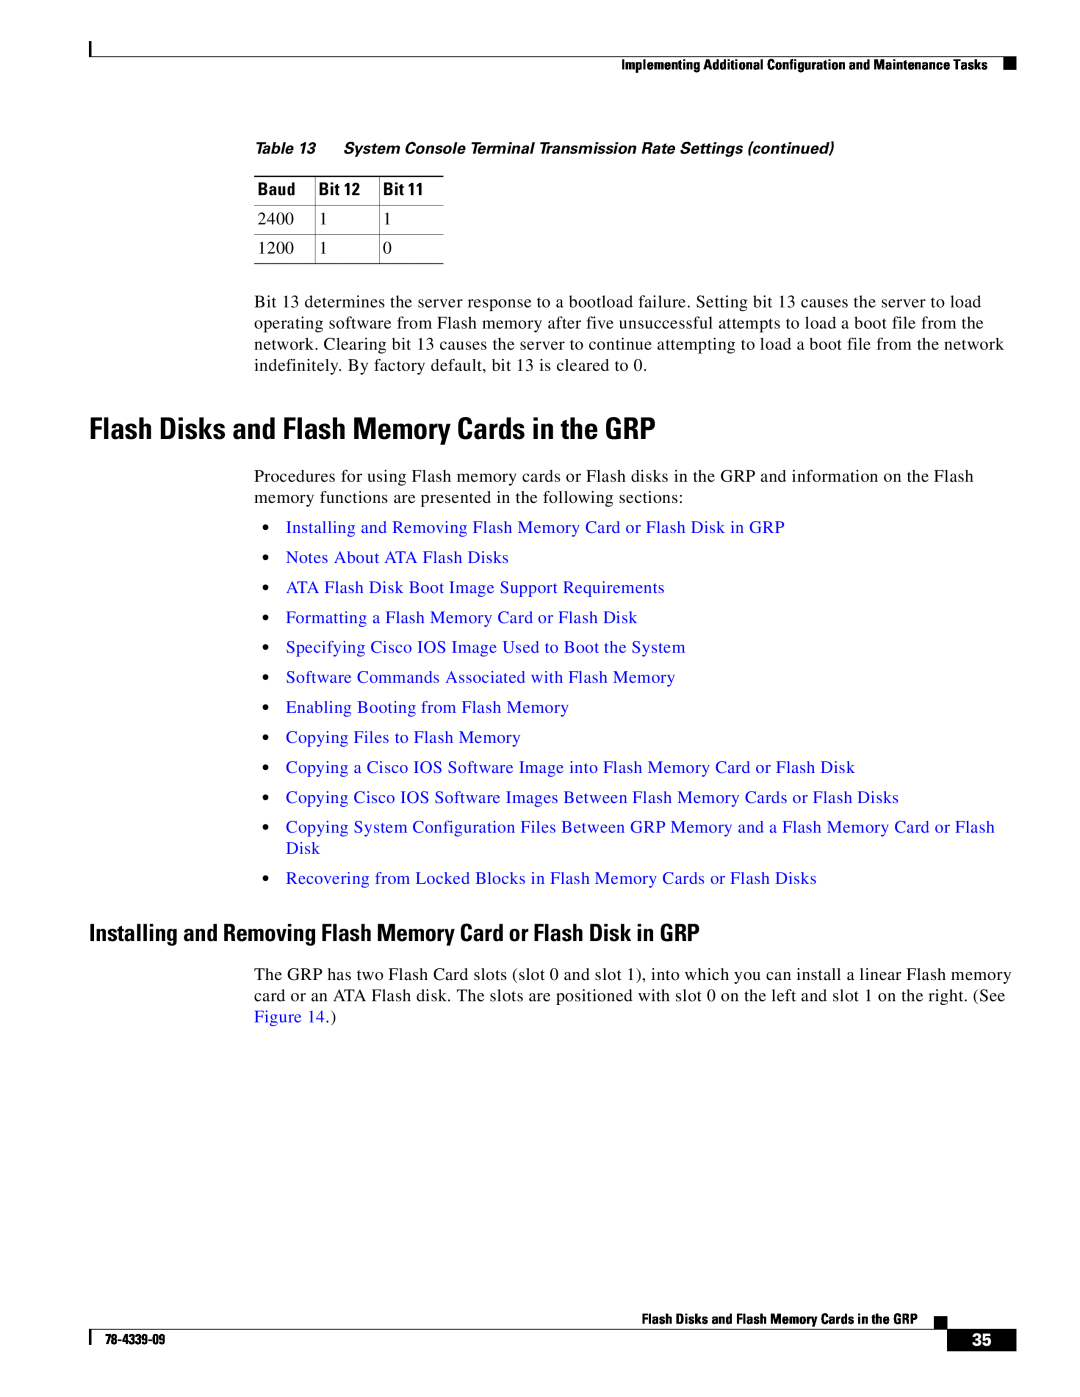 Cisco Systems GRP-B manual Flash Disks and Flash Memory Cards in the GRP, Notes About ATA Flash Disks 